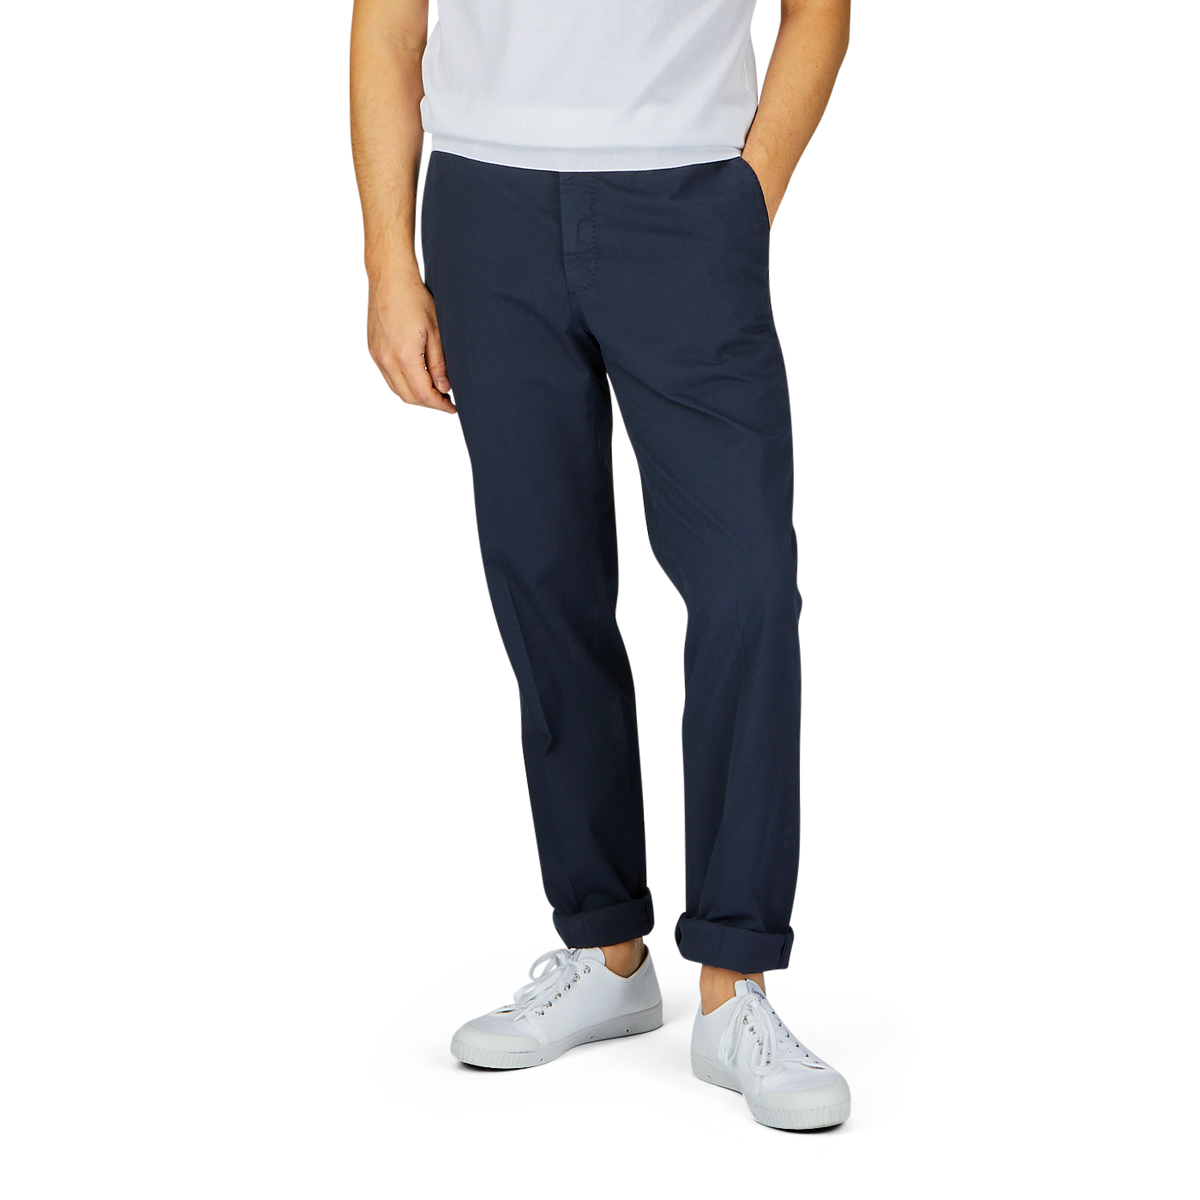 A person standing against a white background, wearing Incotex navy blue cotton stretch regular fit chinos and white sneakers.